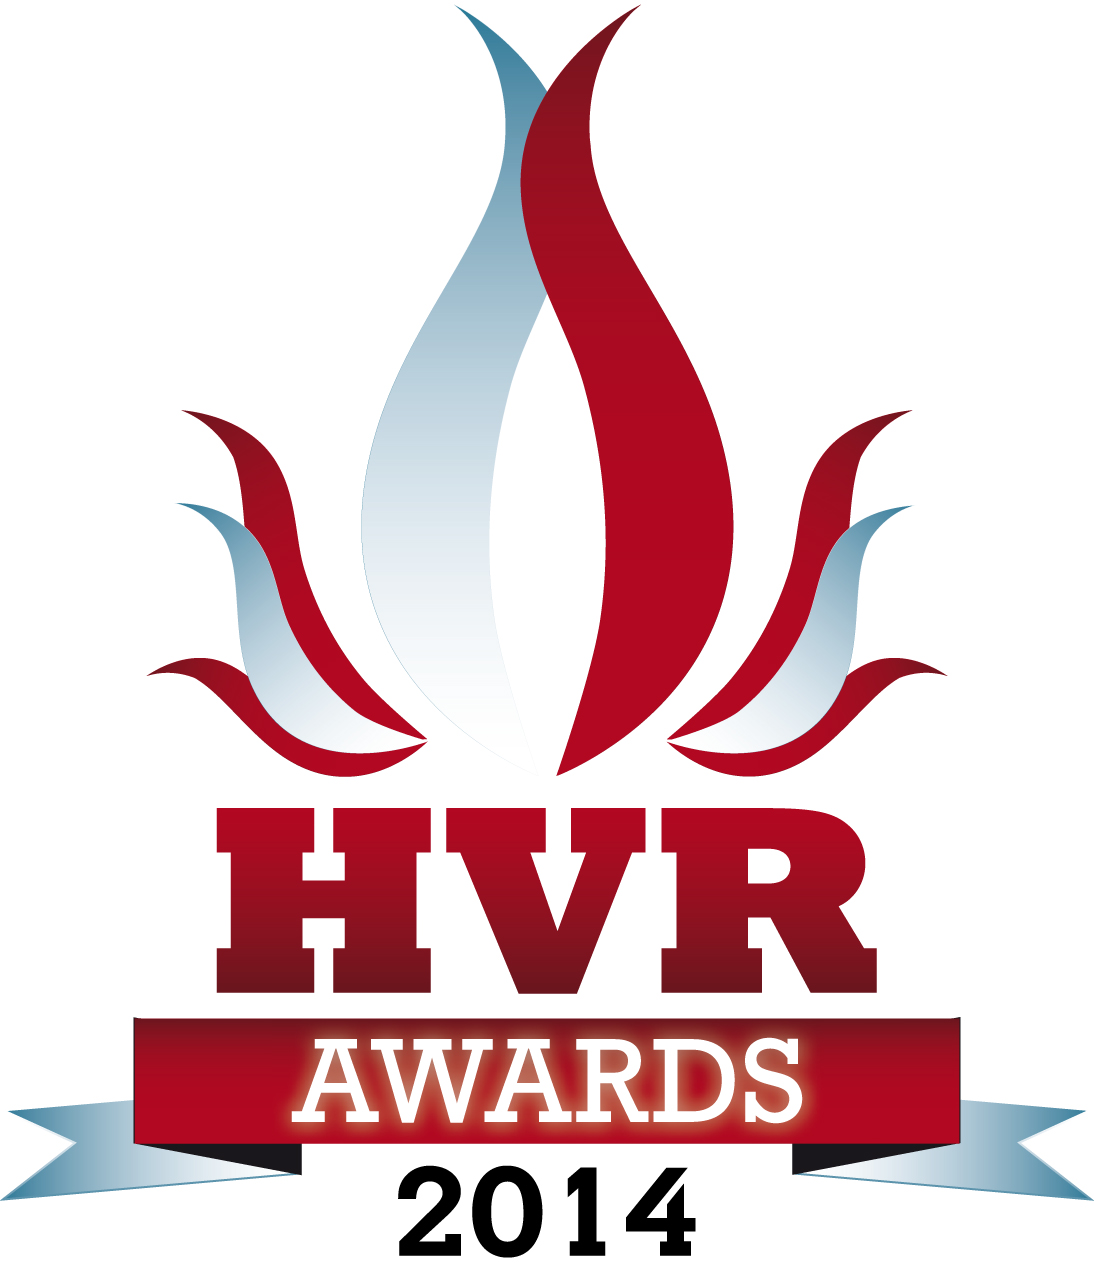 Tickets still available for the HVR Awards 2014